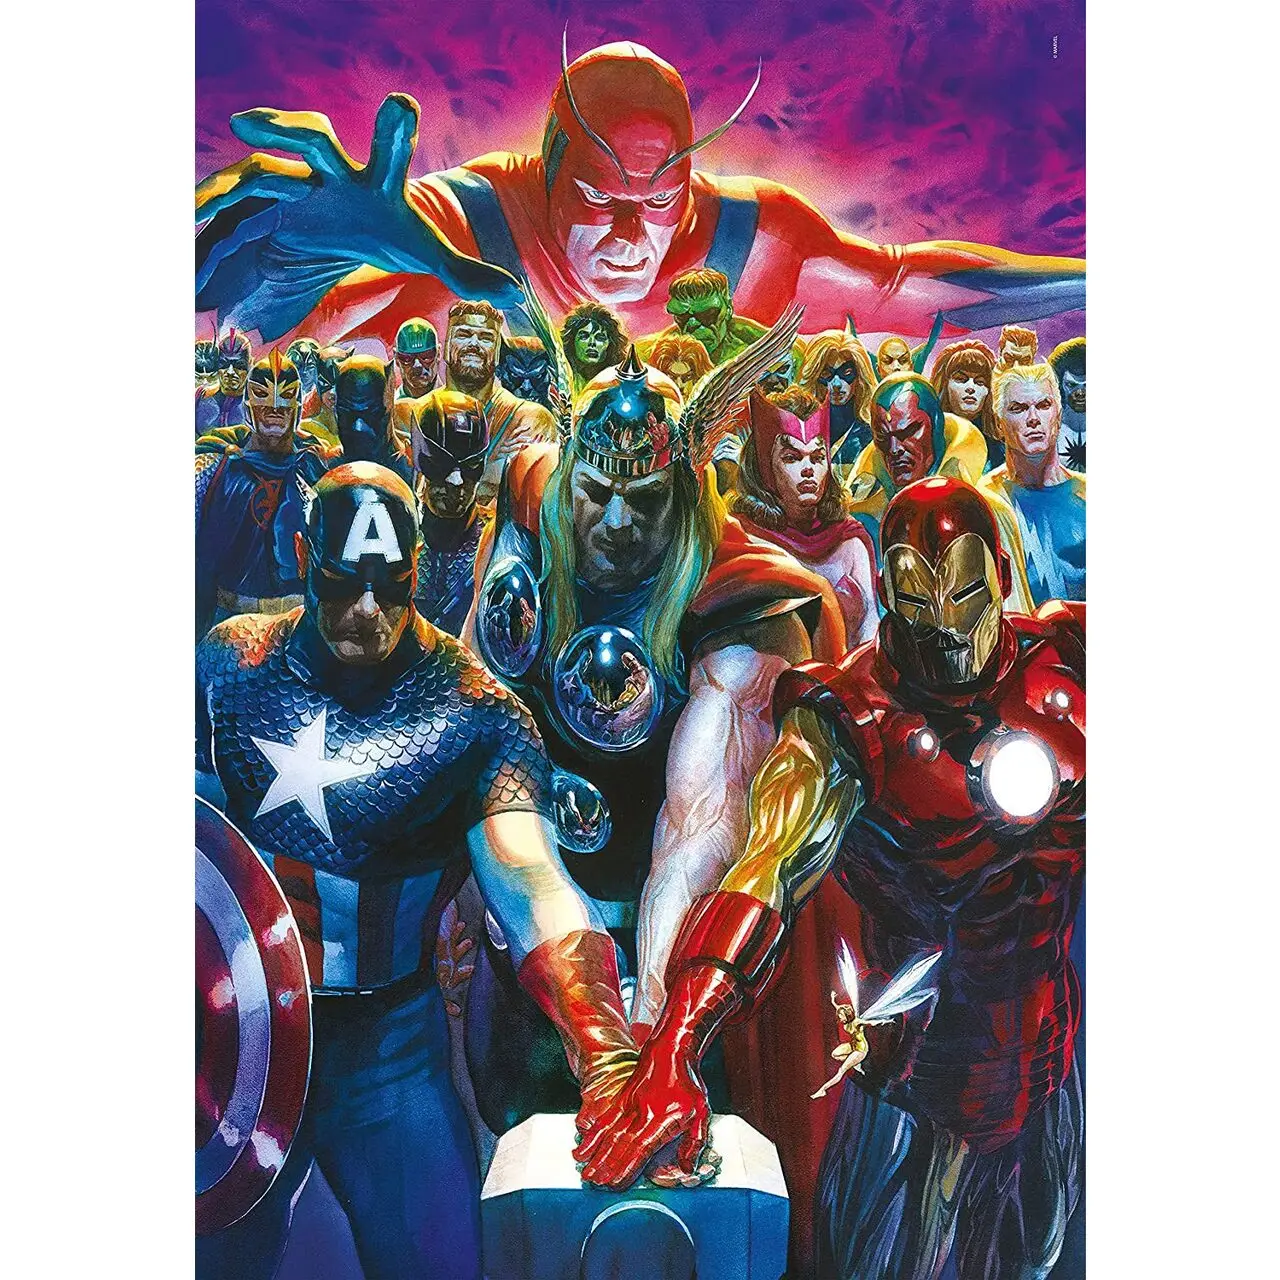 The Teile 1000 Avengers Puzzle